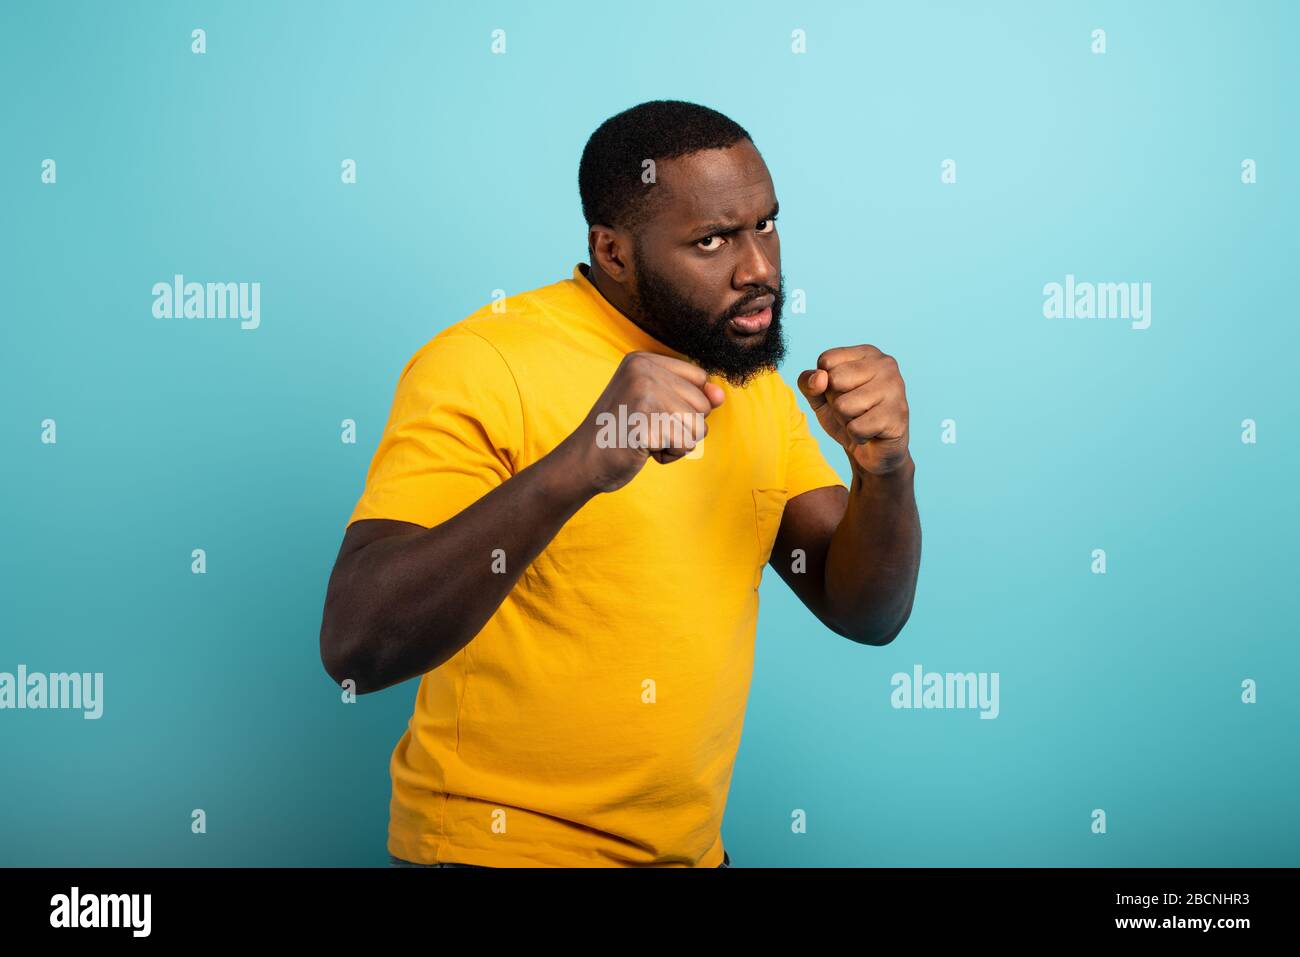 Man attacks with a punch the covid19 coronavirus. Blue background Stock Photo